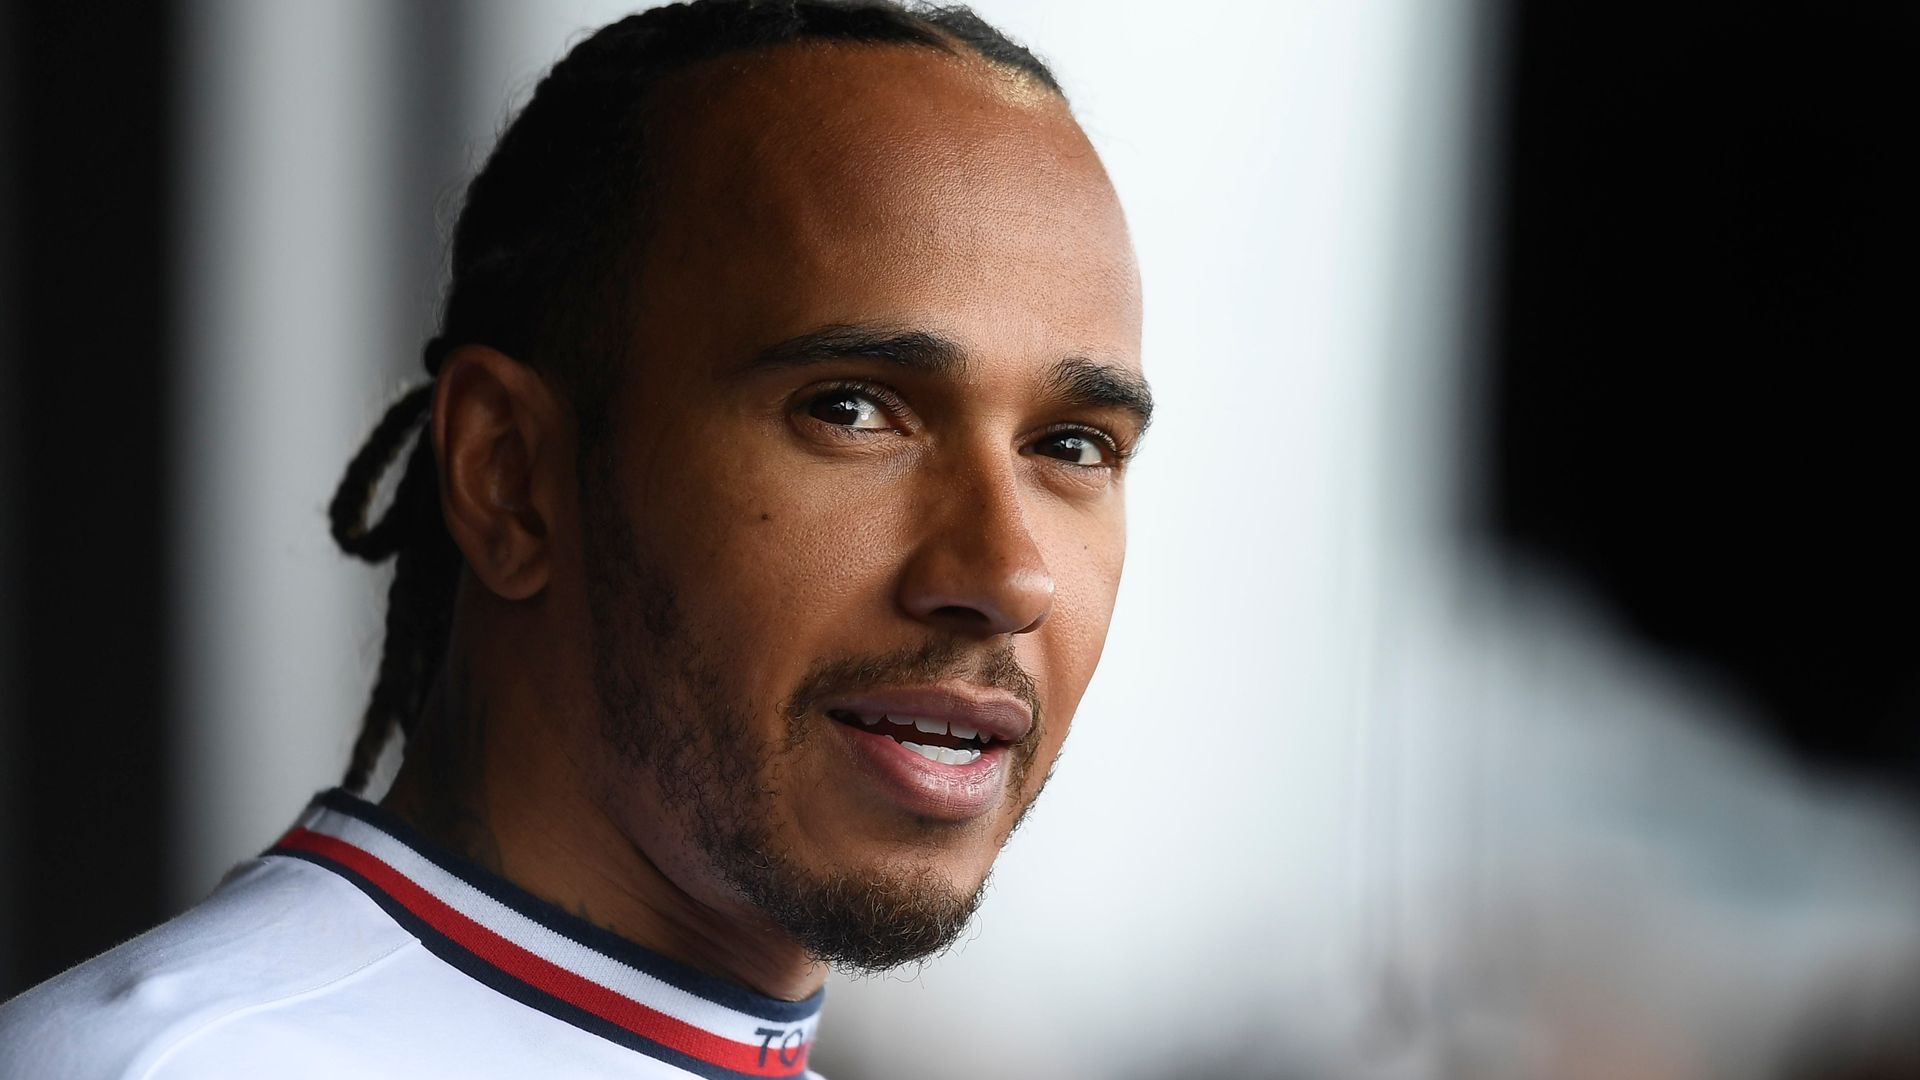 Hamilton 'gutted' as Mercedes miss chance to contend